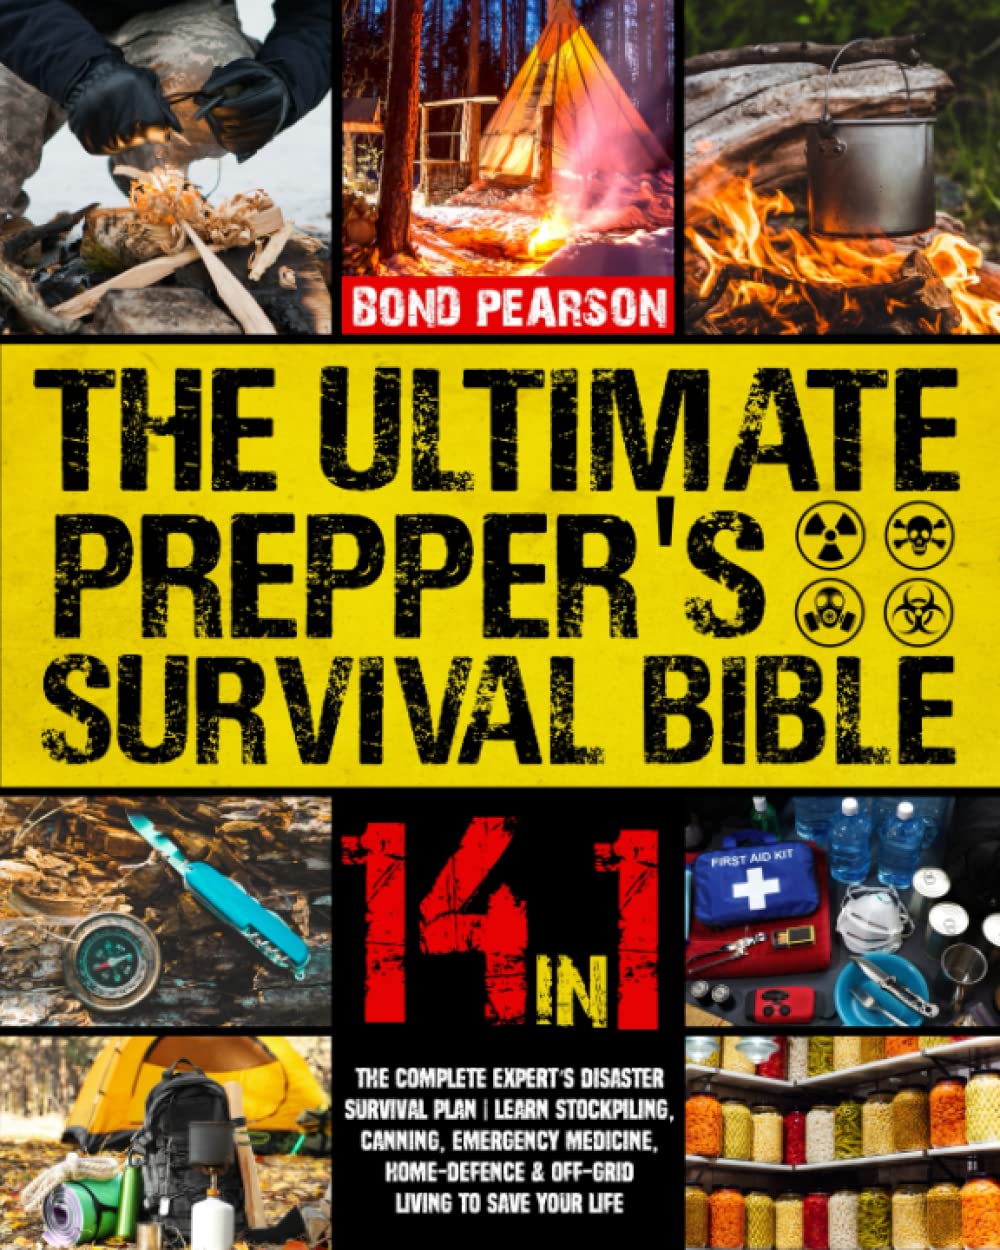 The Ultimate Prepper’s Survival Bible: 14 in 1: The Complete Expert’s Disaster Survival Plan | Learn Stockpiling, Canning, Emergency Medicine, Home-Defence & Off-Grid Living To Save Your Life